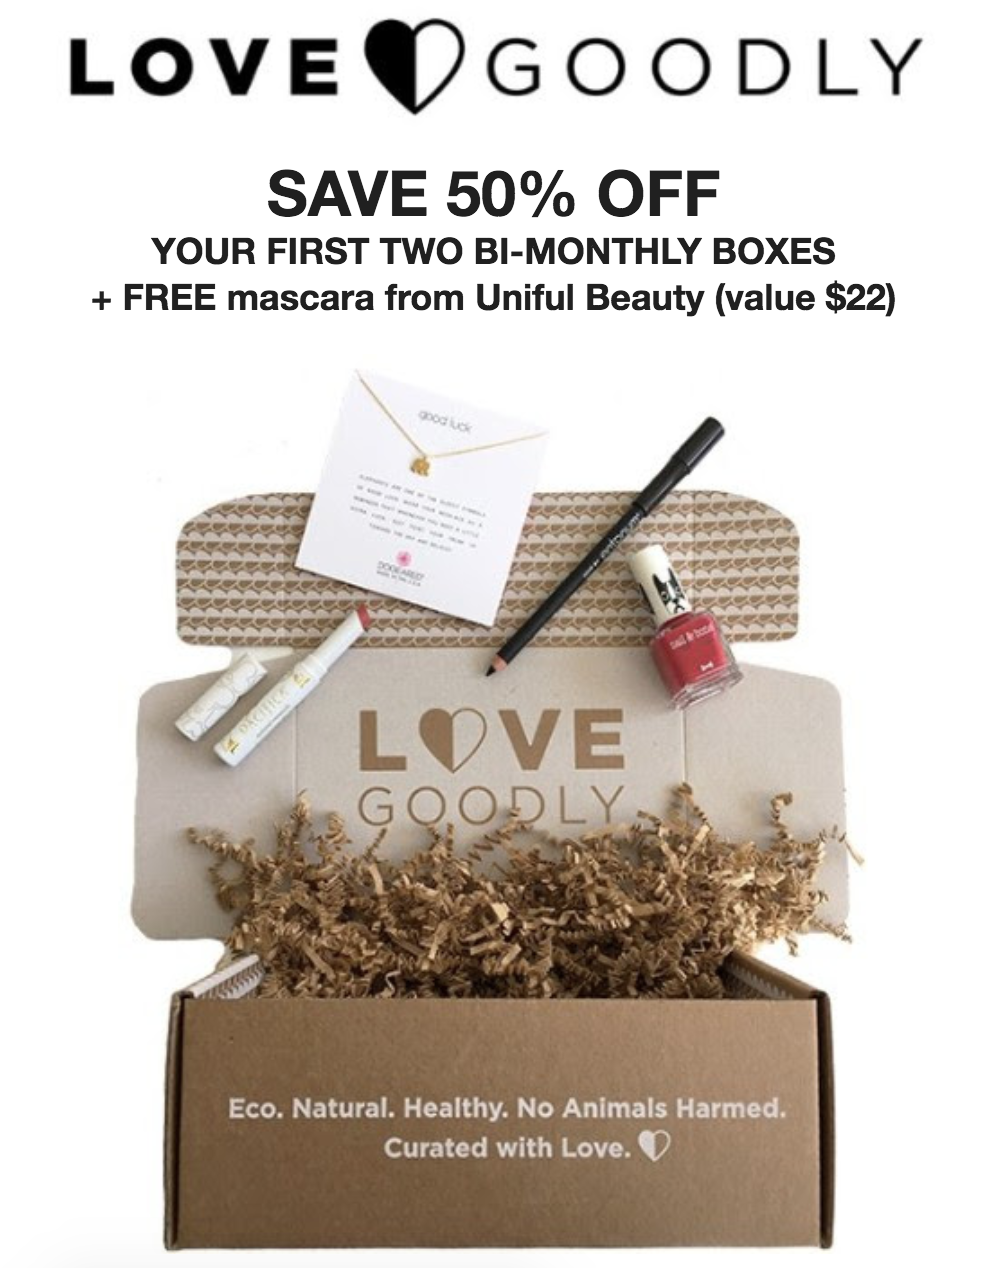 Love Goodly Coupon – $15 Off Your First + $15 Off Your Second Box + FREE Uniful Mascara!